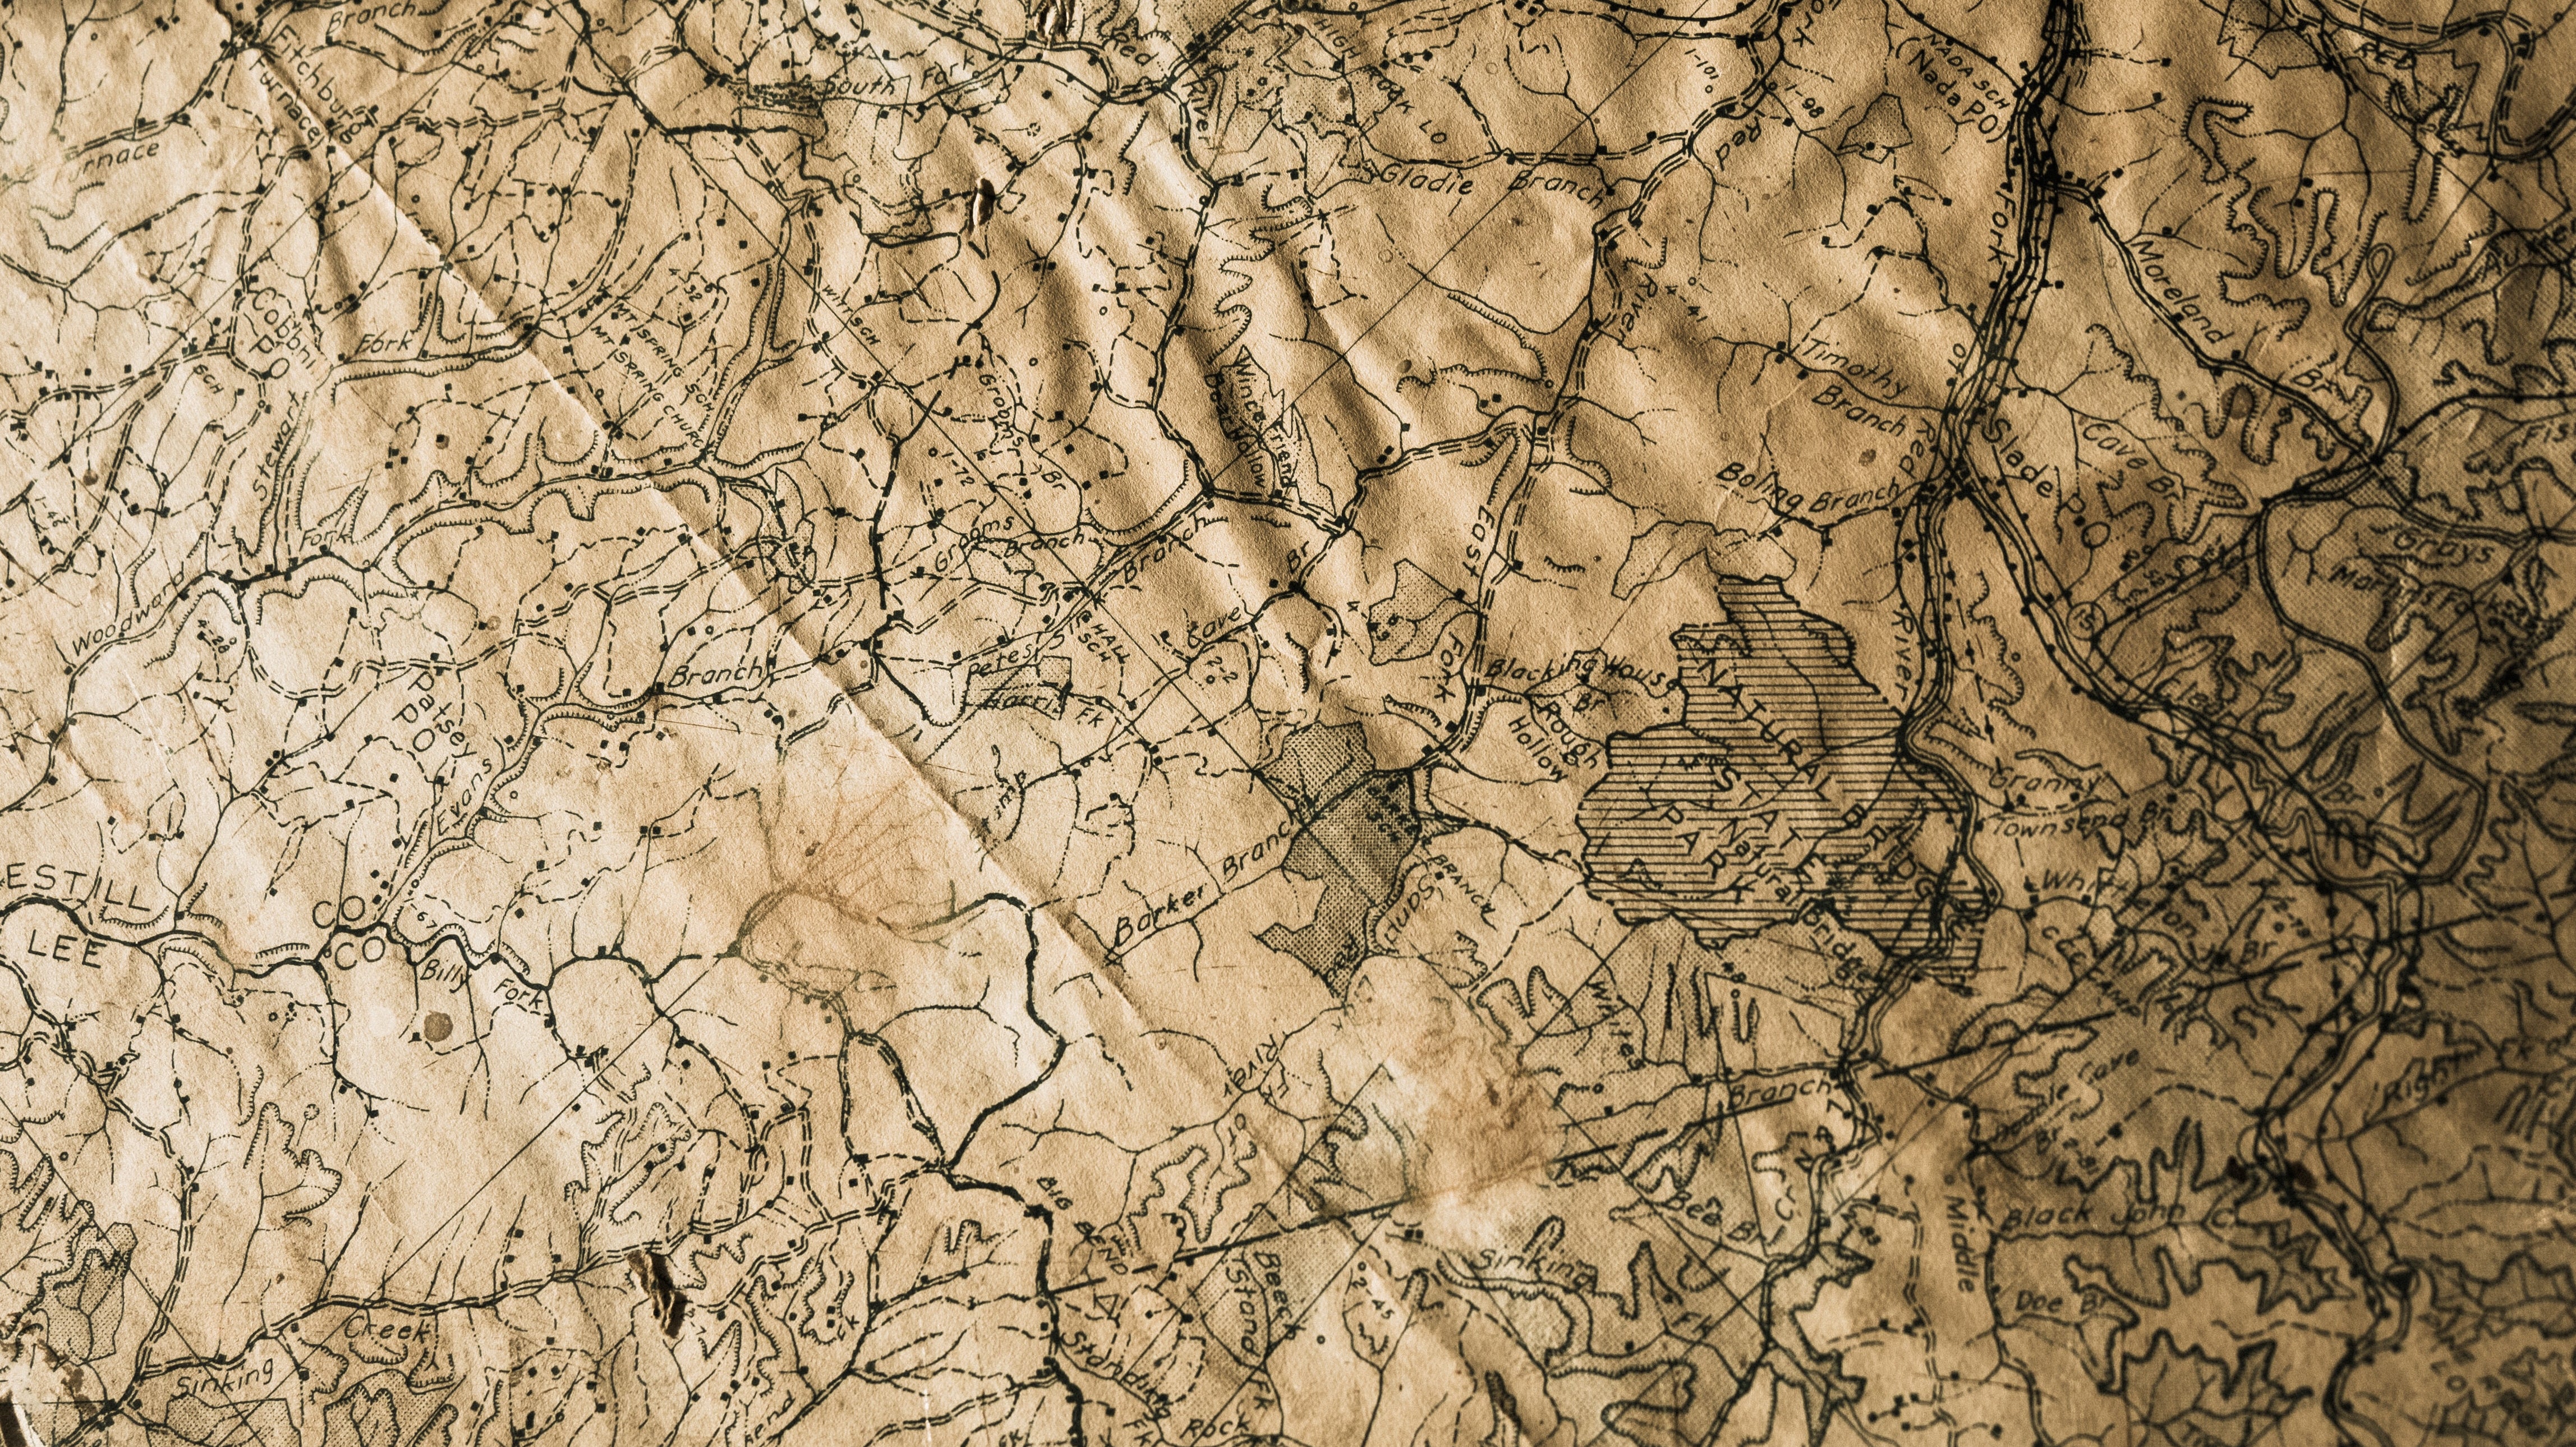 What is Cartography?